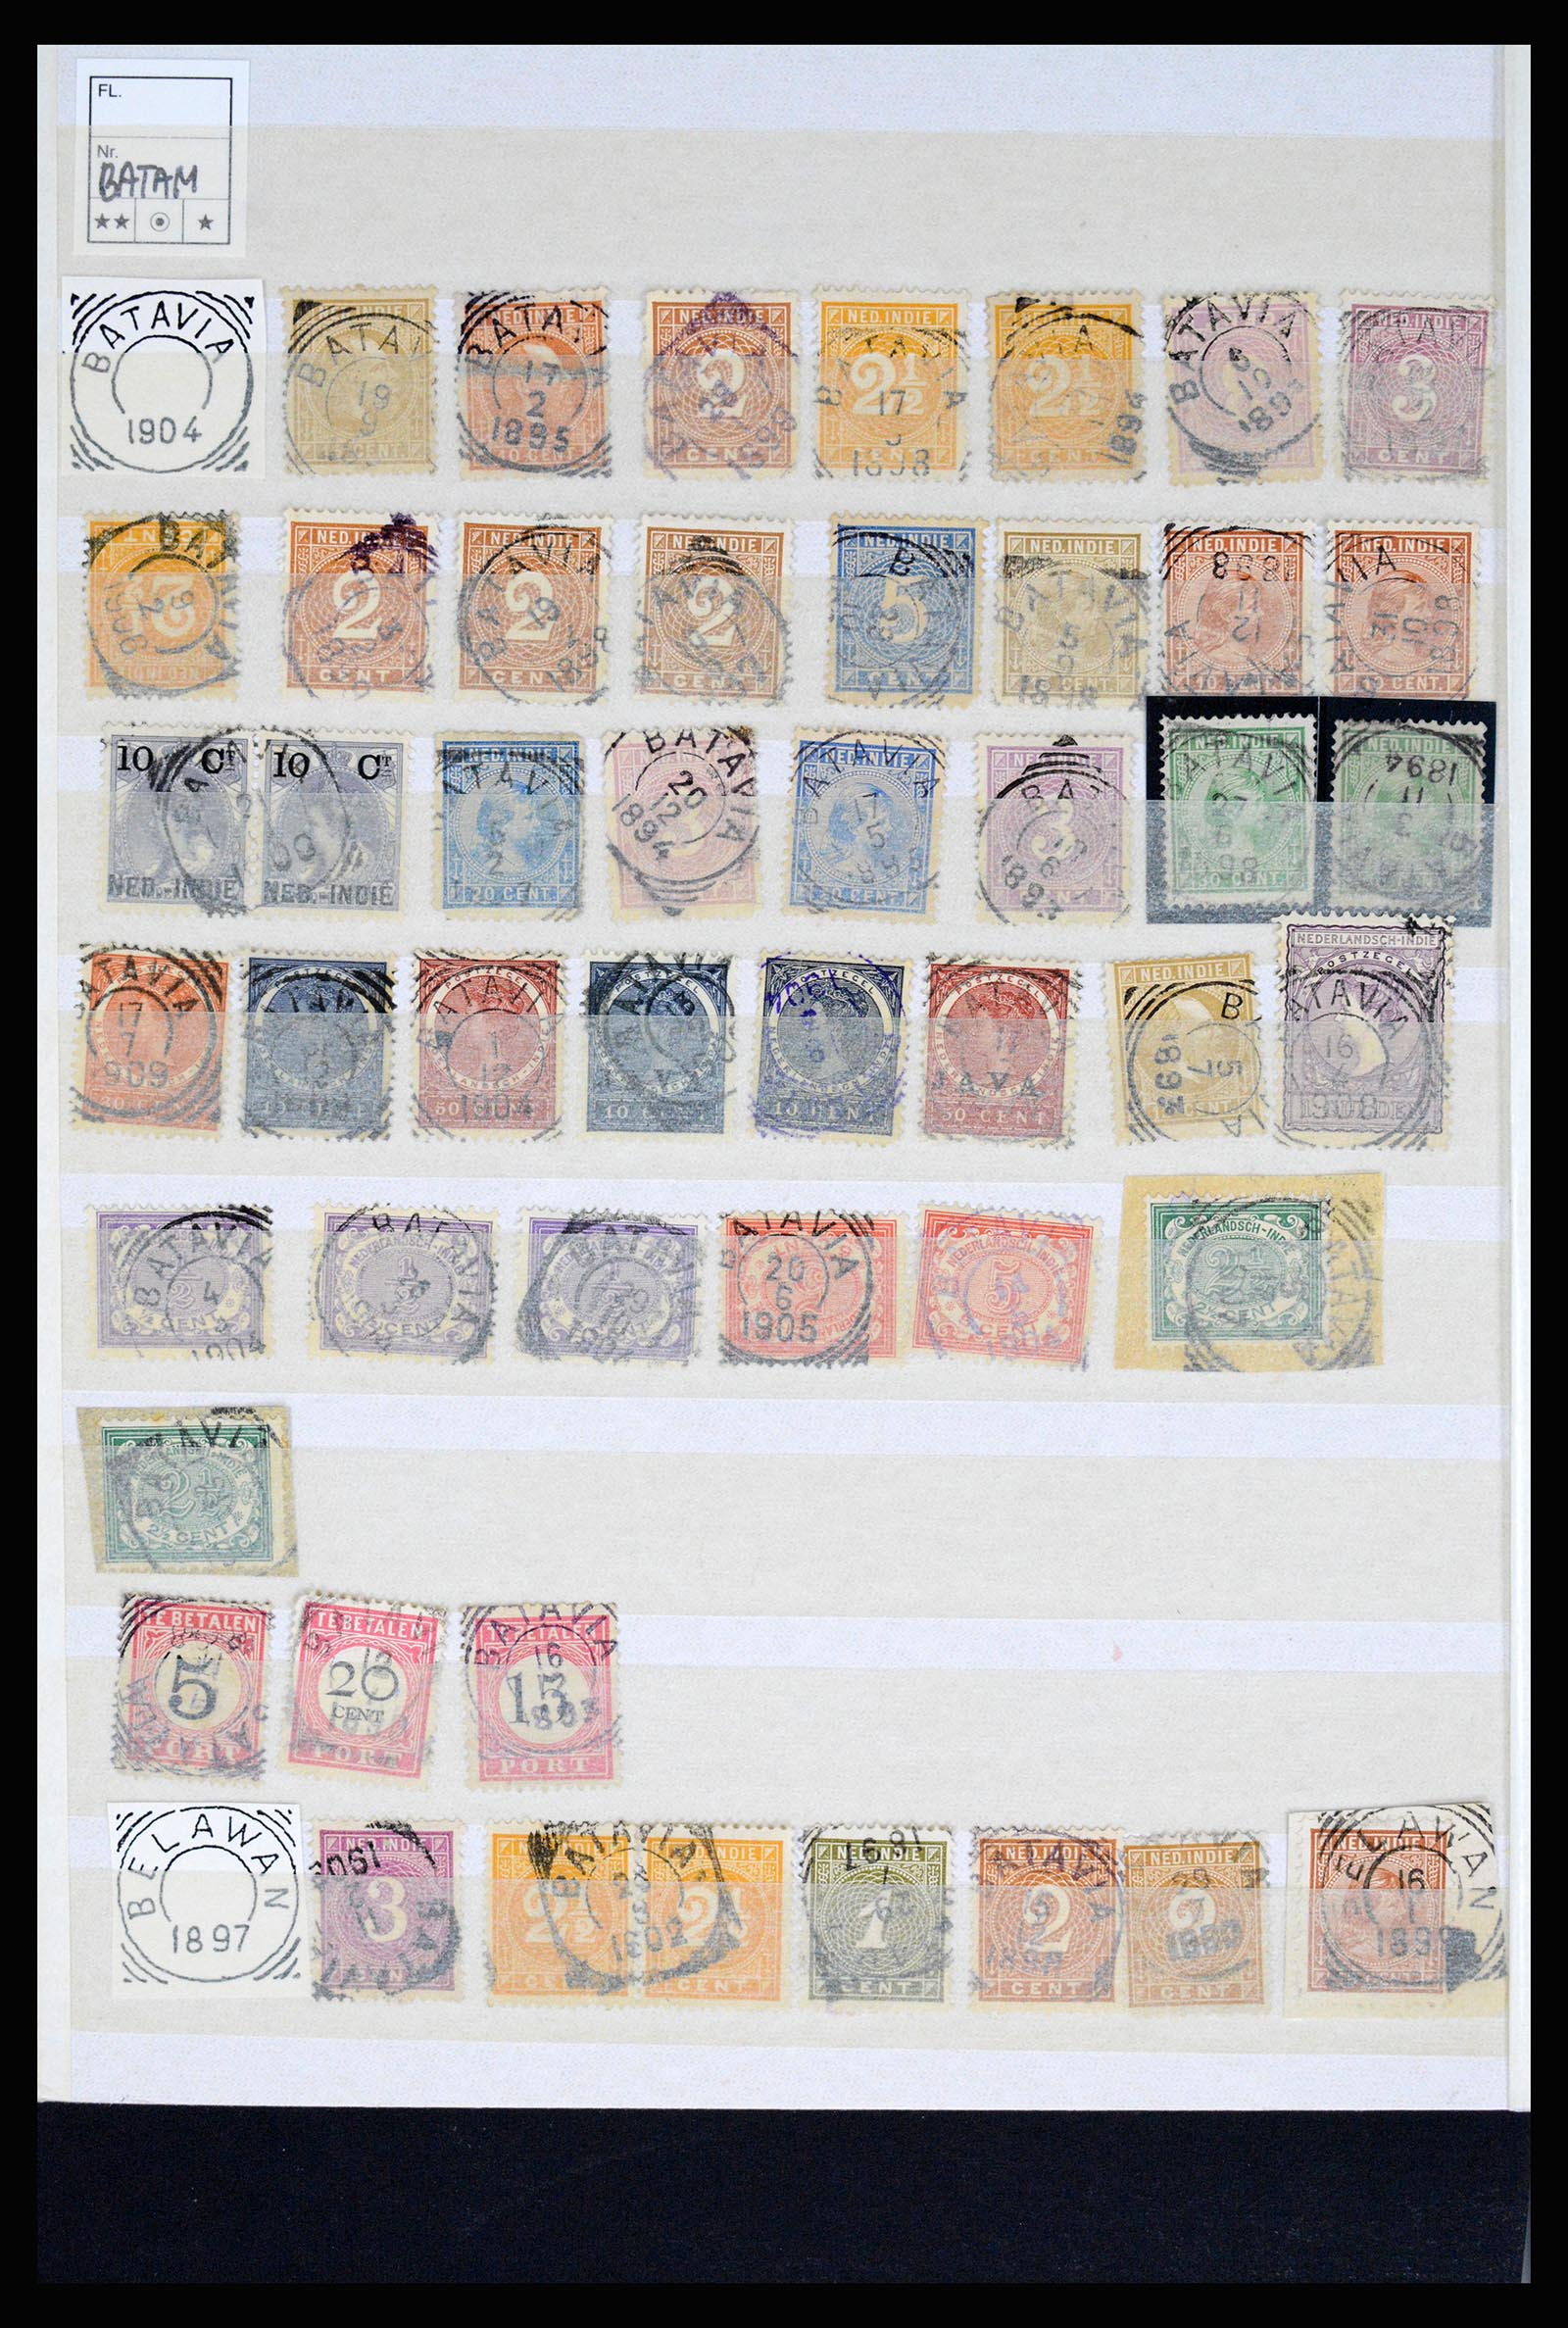 36839 063 - Stamp collection 36839 Dutch east Indies square cancels.